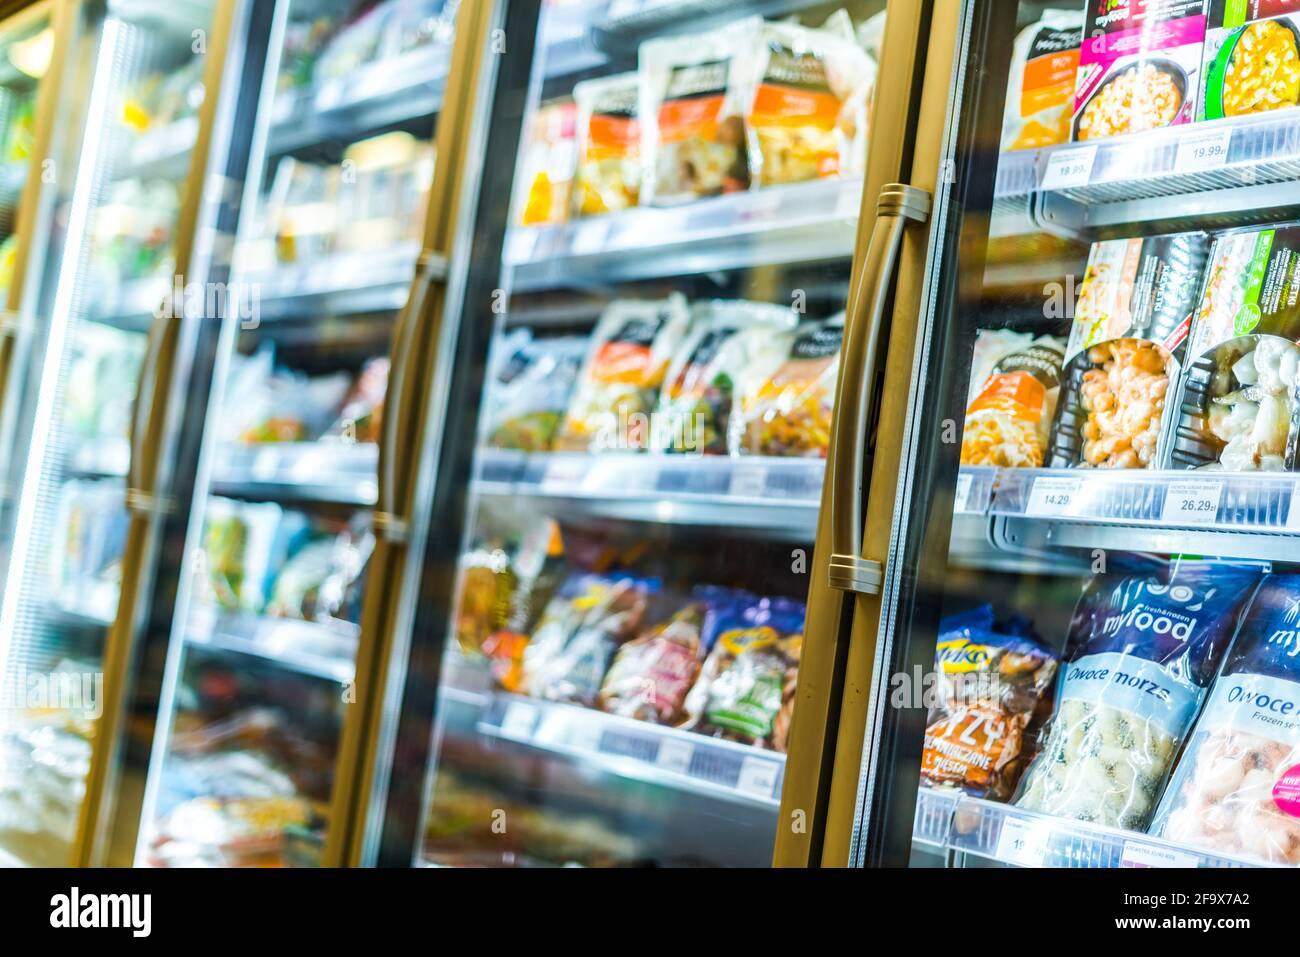 POZNAN, POL - MAR 09, 2021: Food products put up for sale in a commercial refrigerator Stock Photo